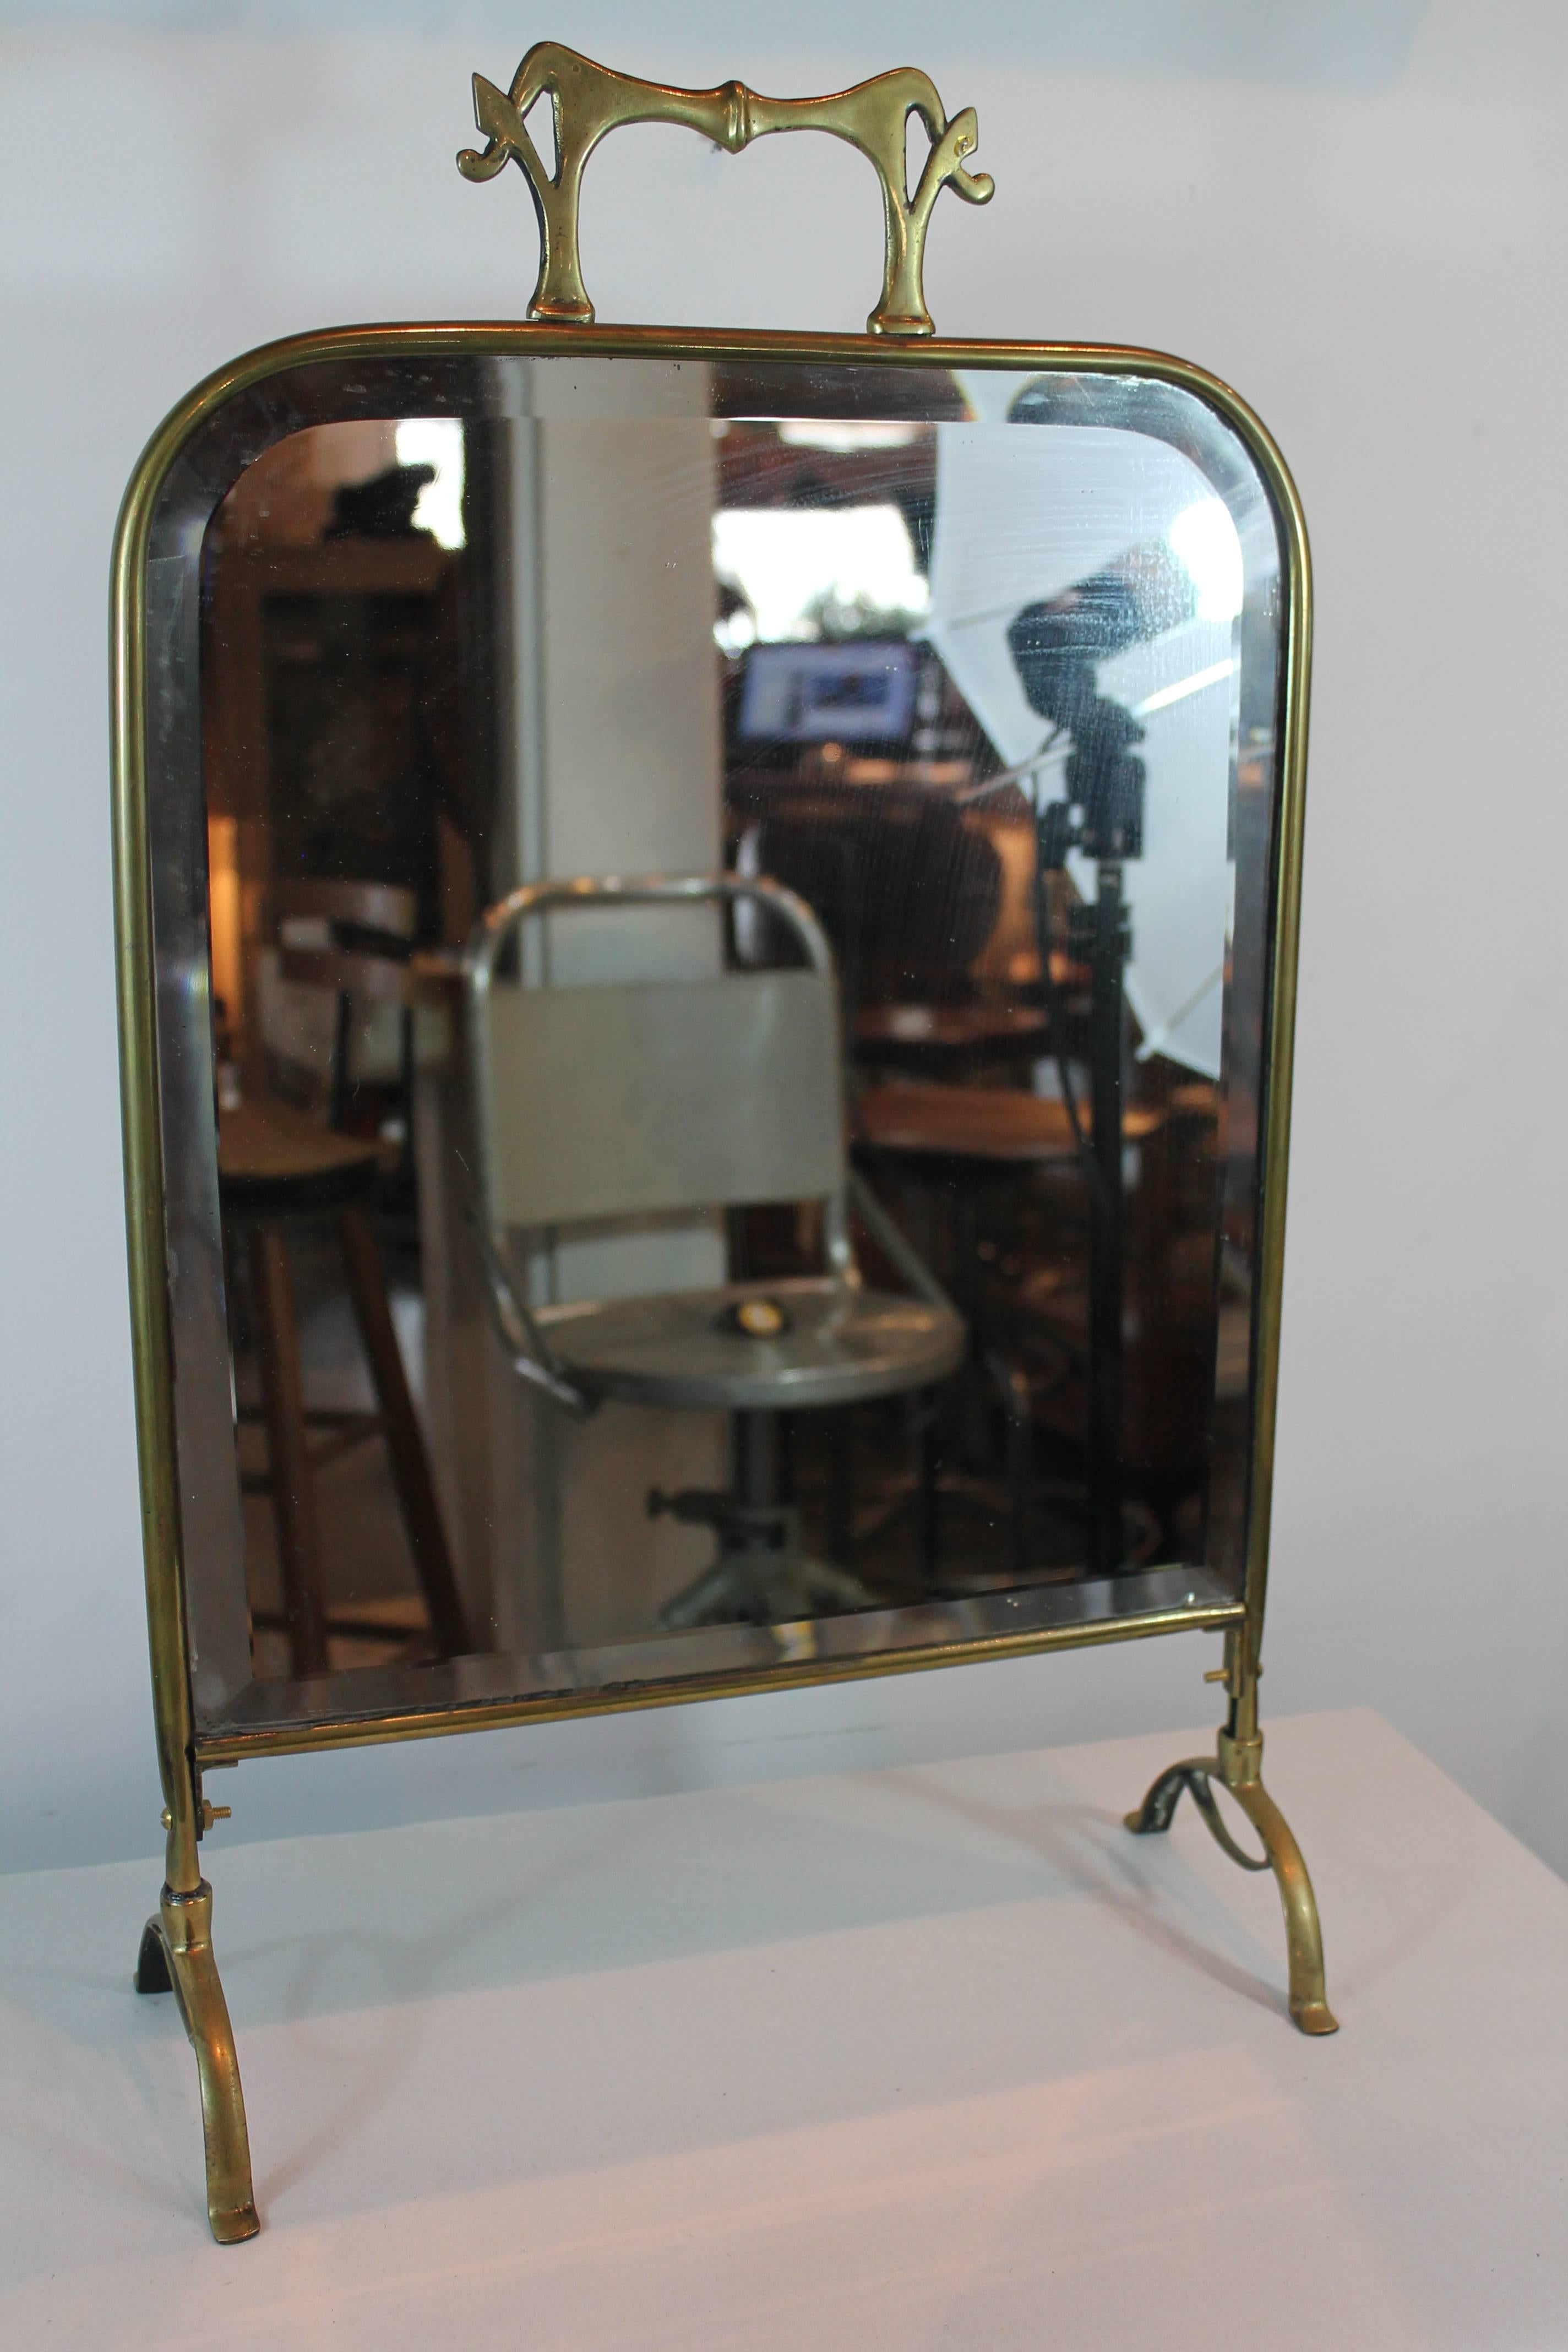 Great simple Nouveau lines on this cast brass freestanding vanity mirror.
Bevelled mirror and elegant footed base.
Has a handle for carrying and was possibly used in a department or clothing store.